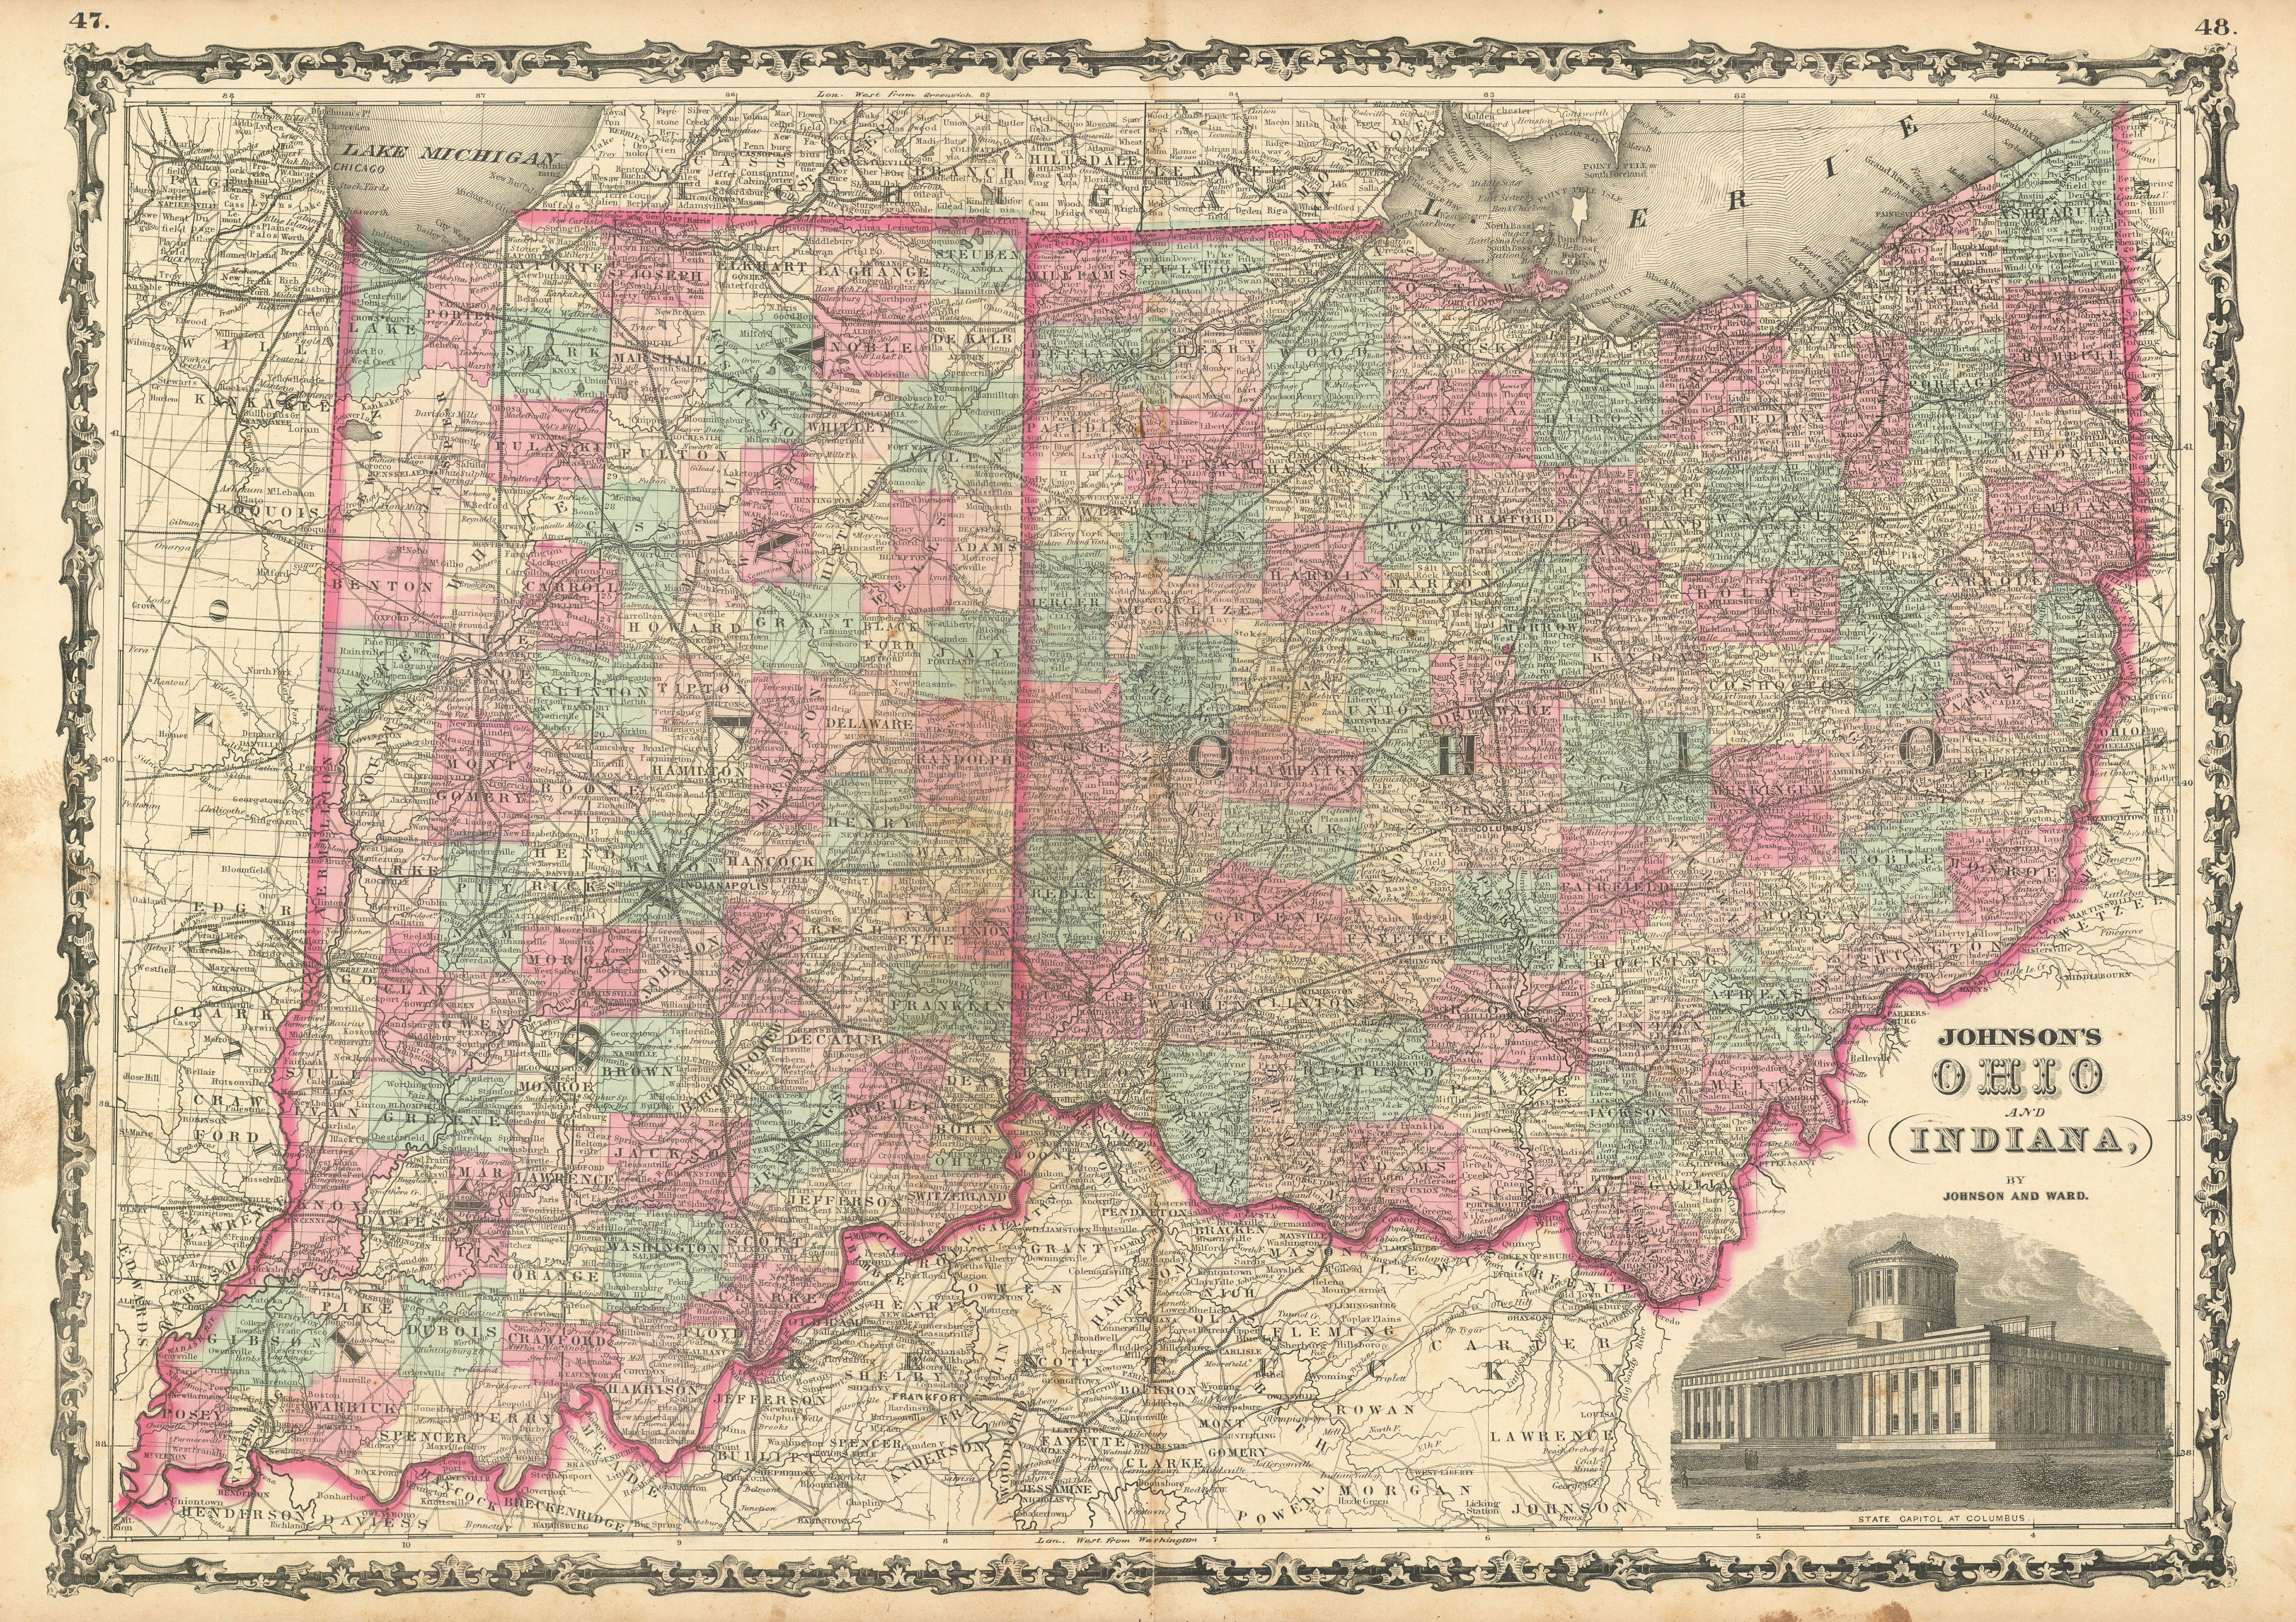 Associate Product Johnson's Ohio & Indiana. US state map showing counties 1863 old antique